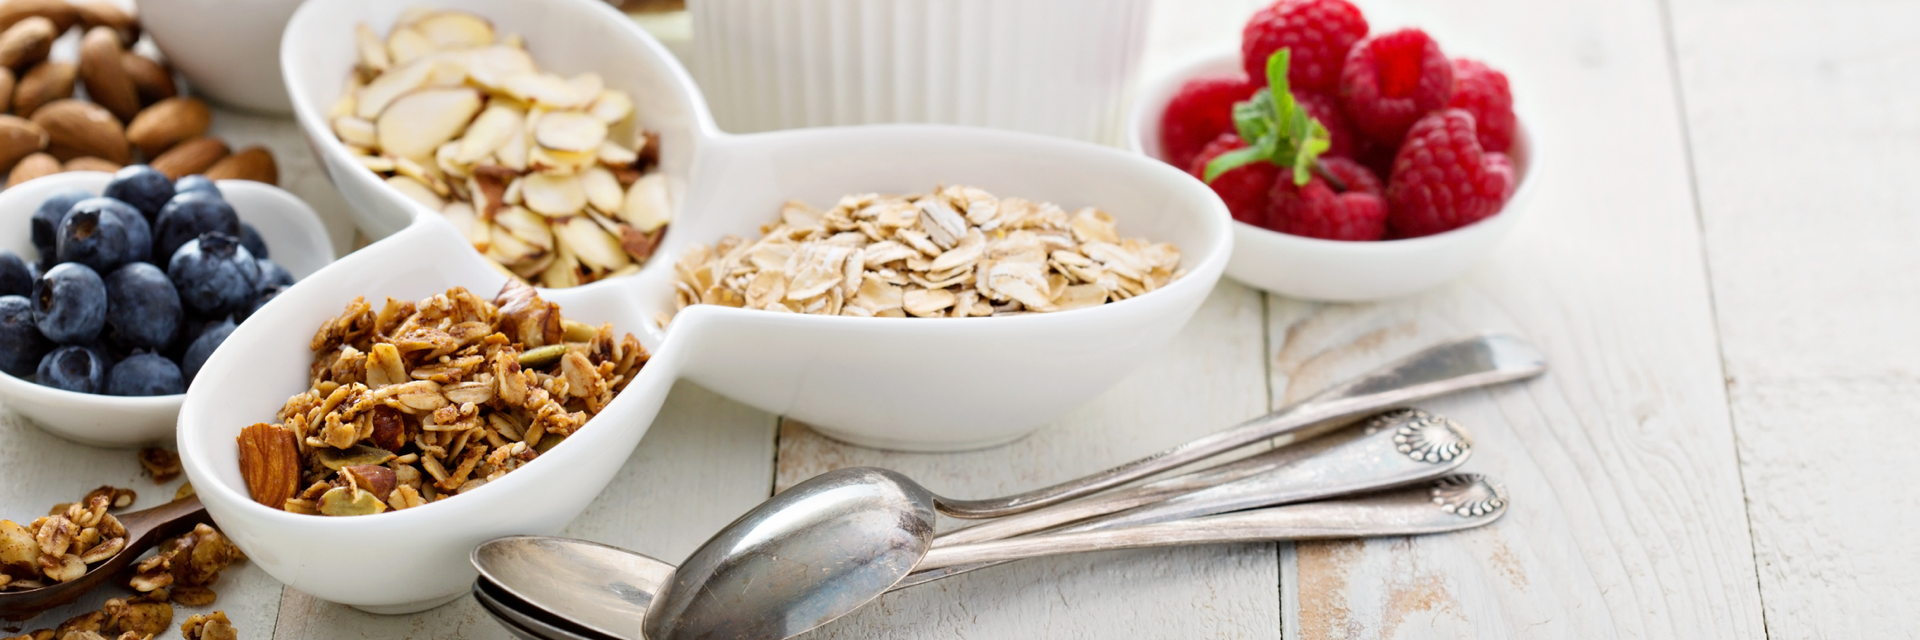 Article, 10 great foods with fibre to add to your diet